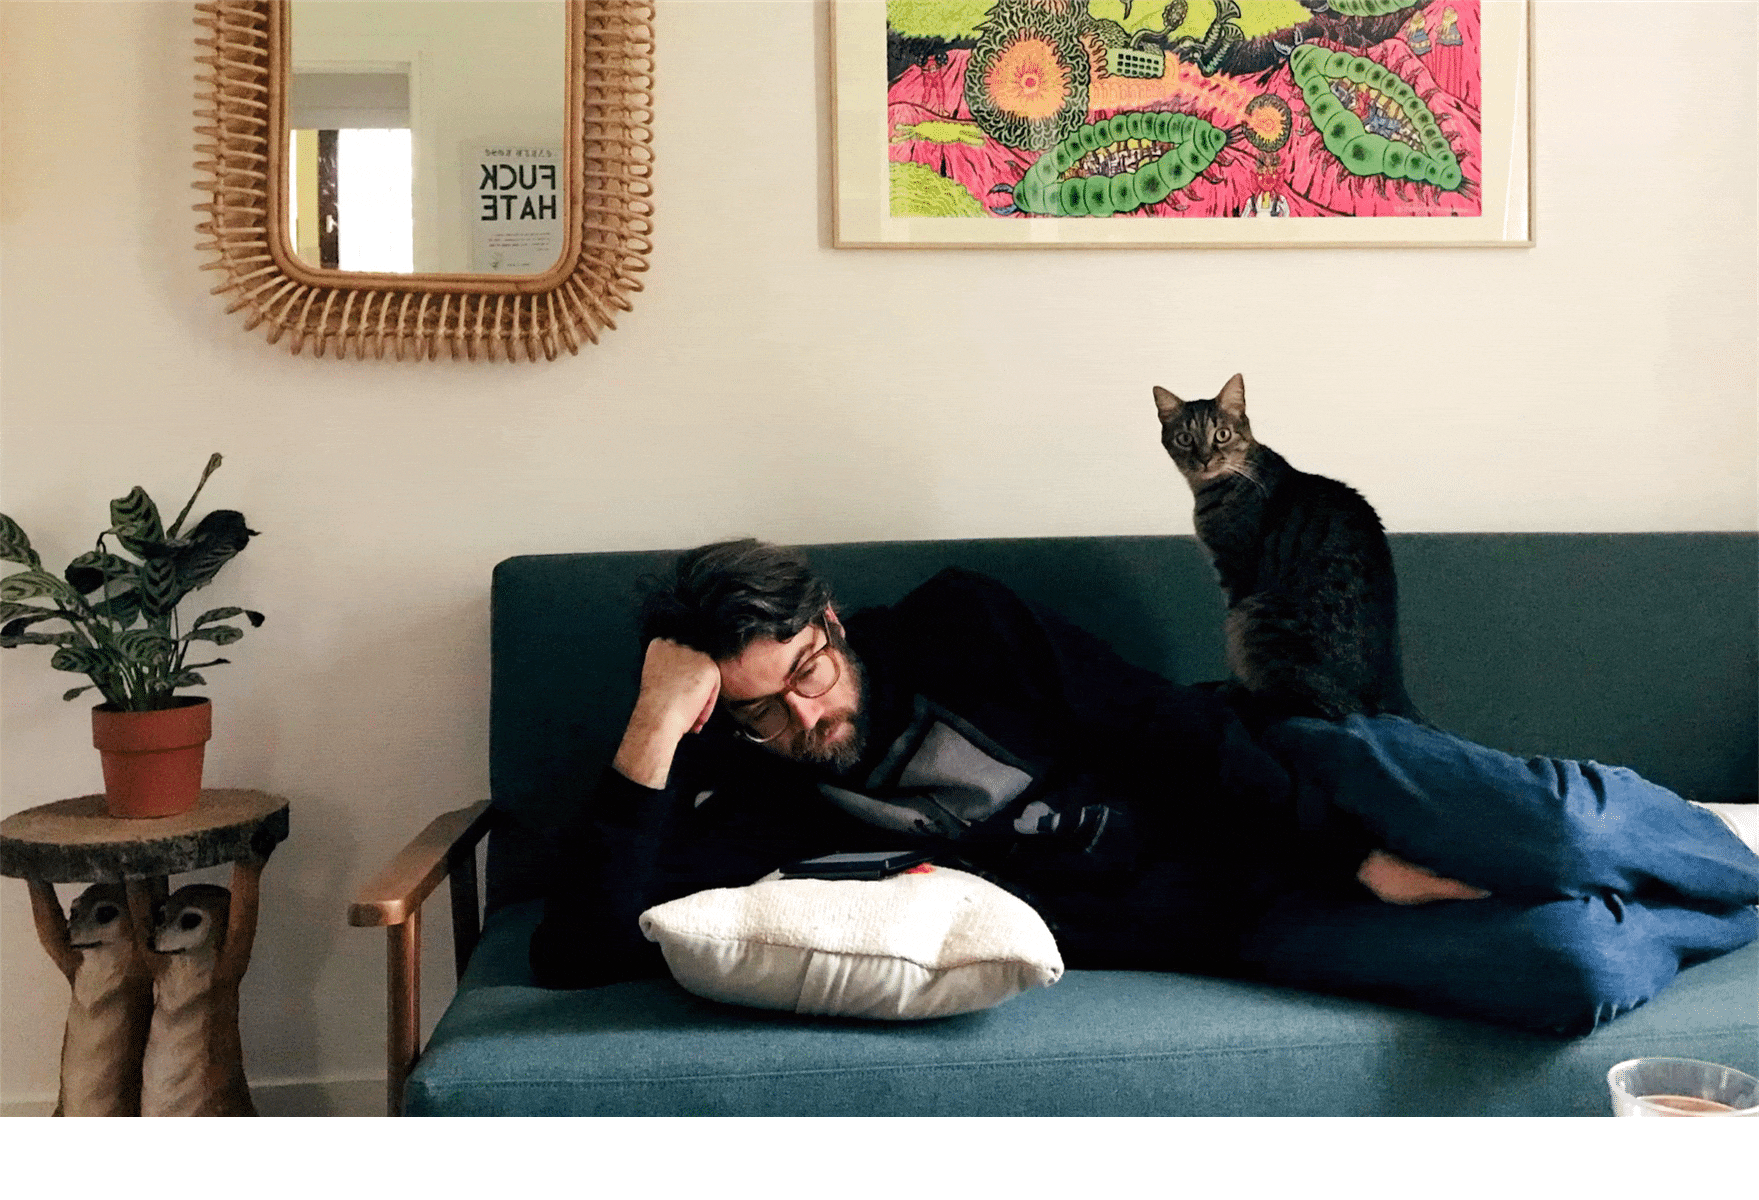 The author Zachary Dillon reclines on a green couch in a living room, reading an e-reader. There is a dark, stripey cat sitting on him and staring at the camera.